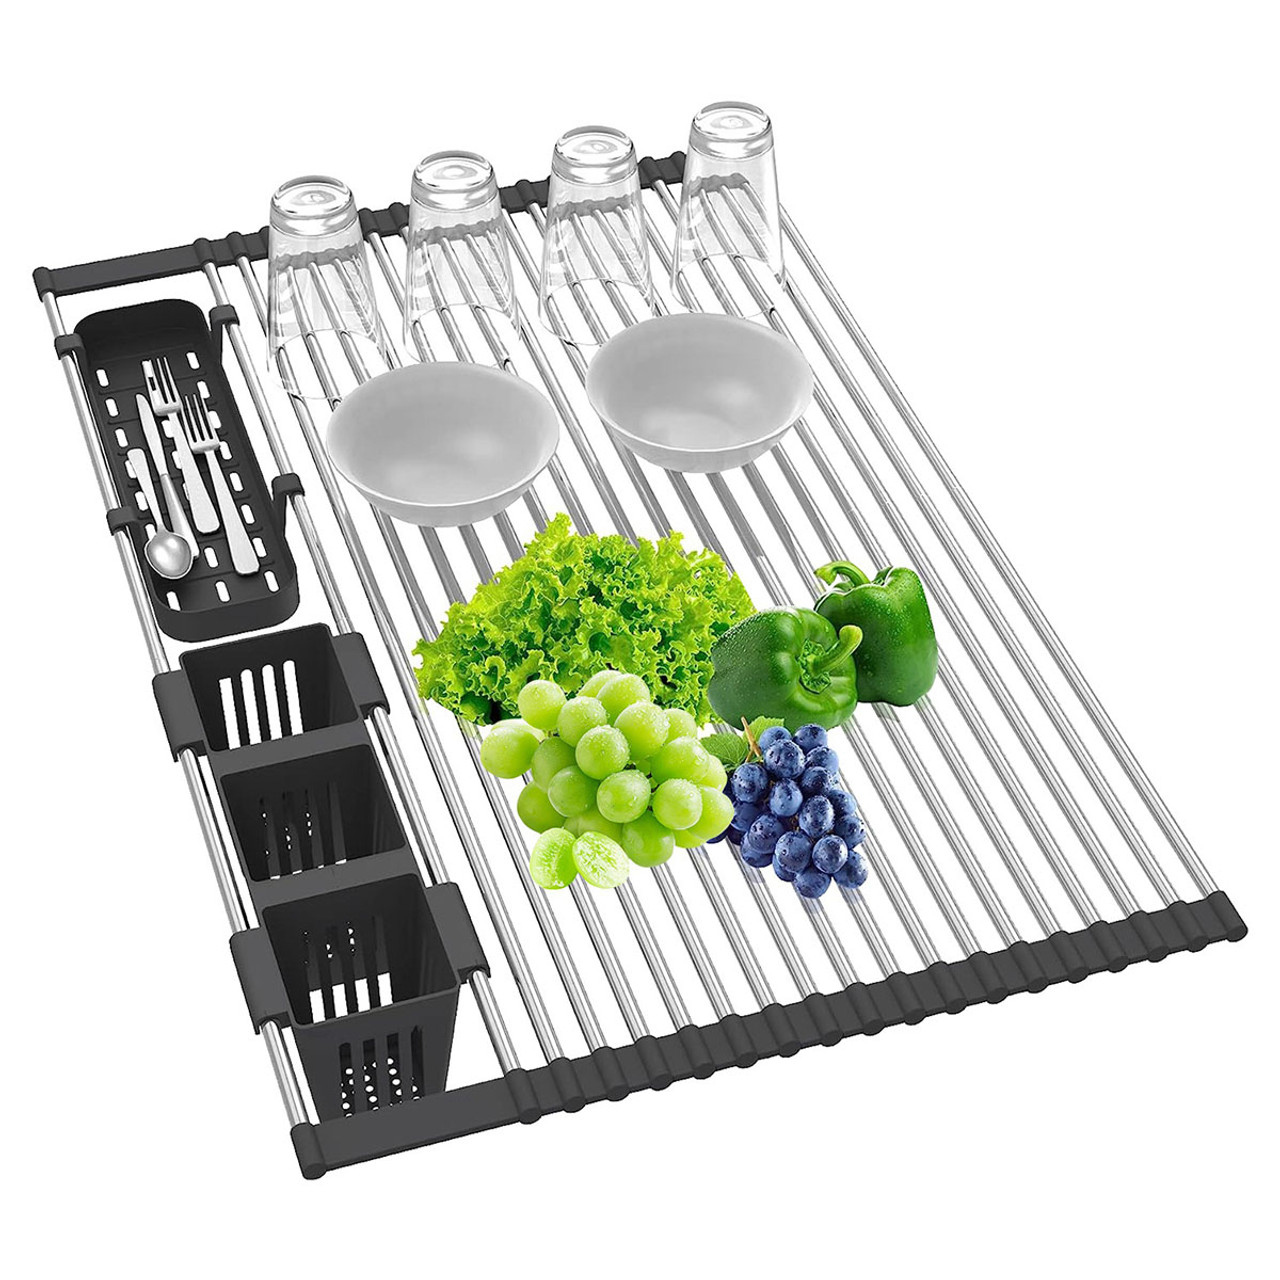 NewHome™ Roll-up Dish Drying Rack product image